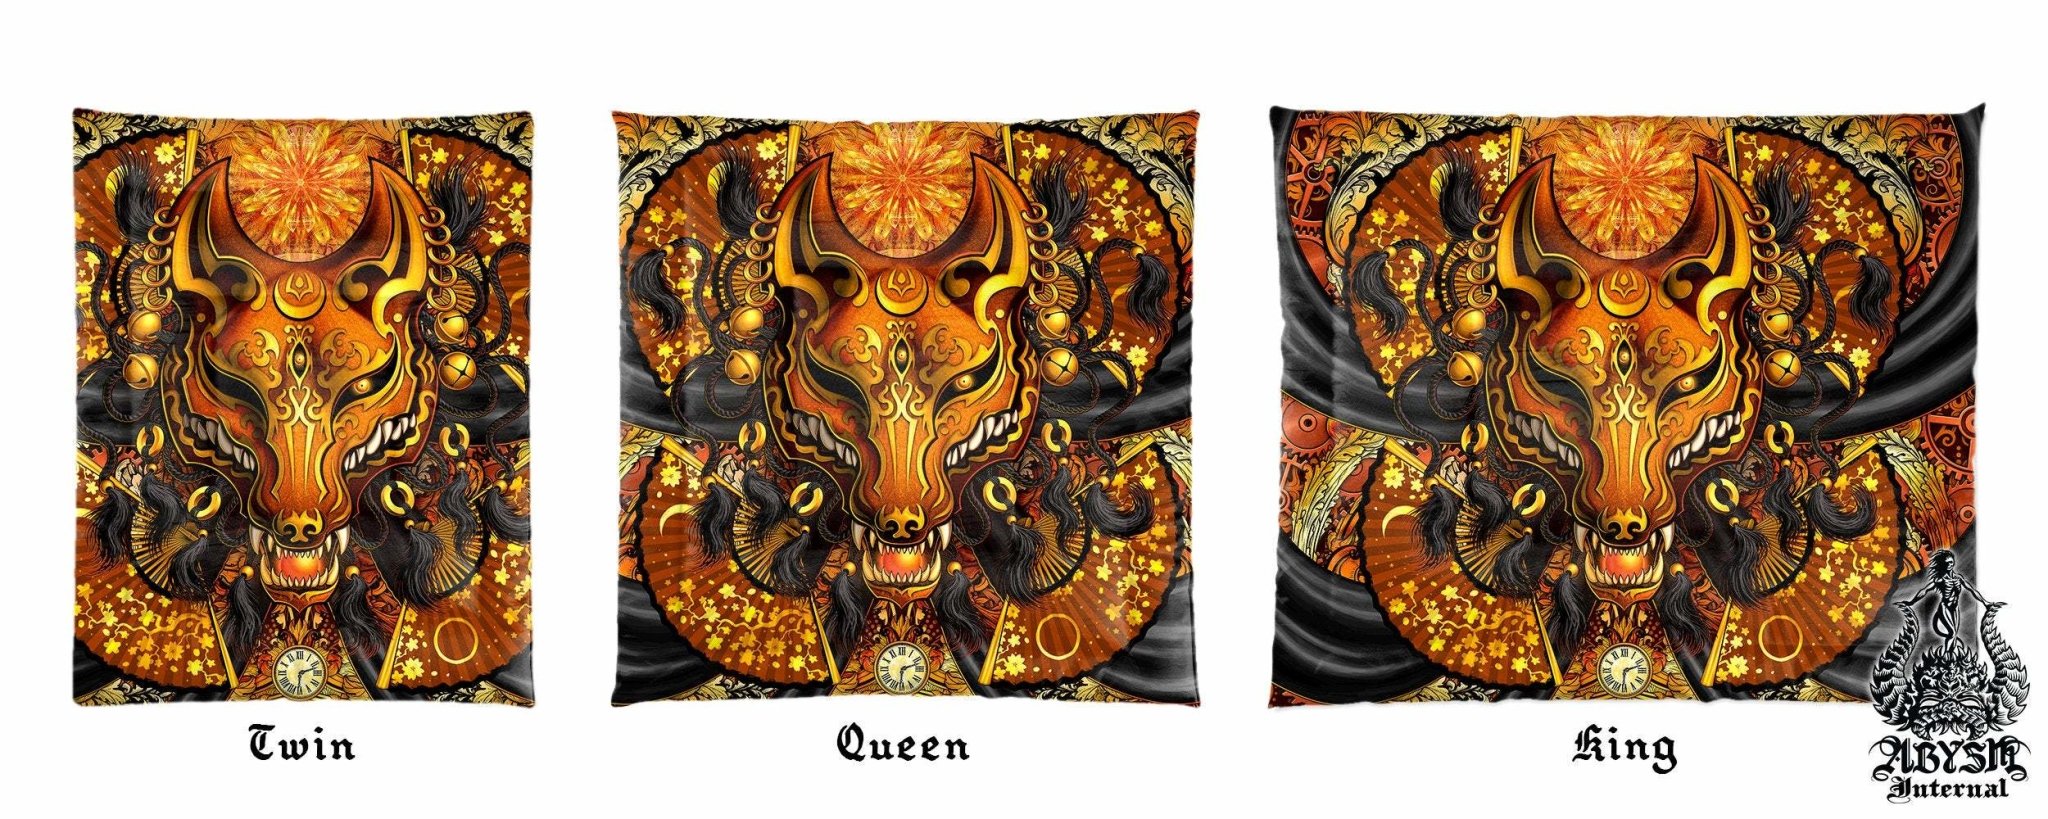 Kitsune Mask Bedding Set, Comforter and Duvet, Fox Okami and Anime Bed Cover and Bedroom Decor, King, Queen and Twin Size - Steampunk, Black - Abysm Internal